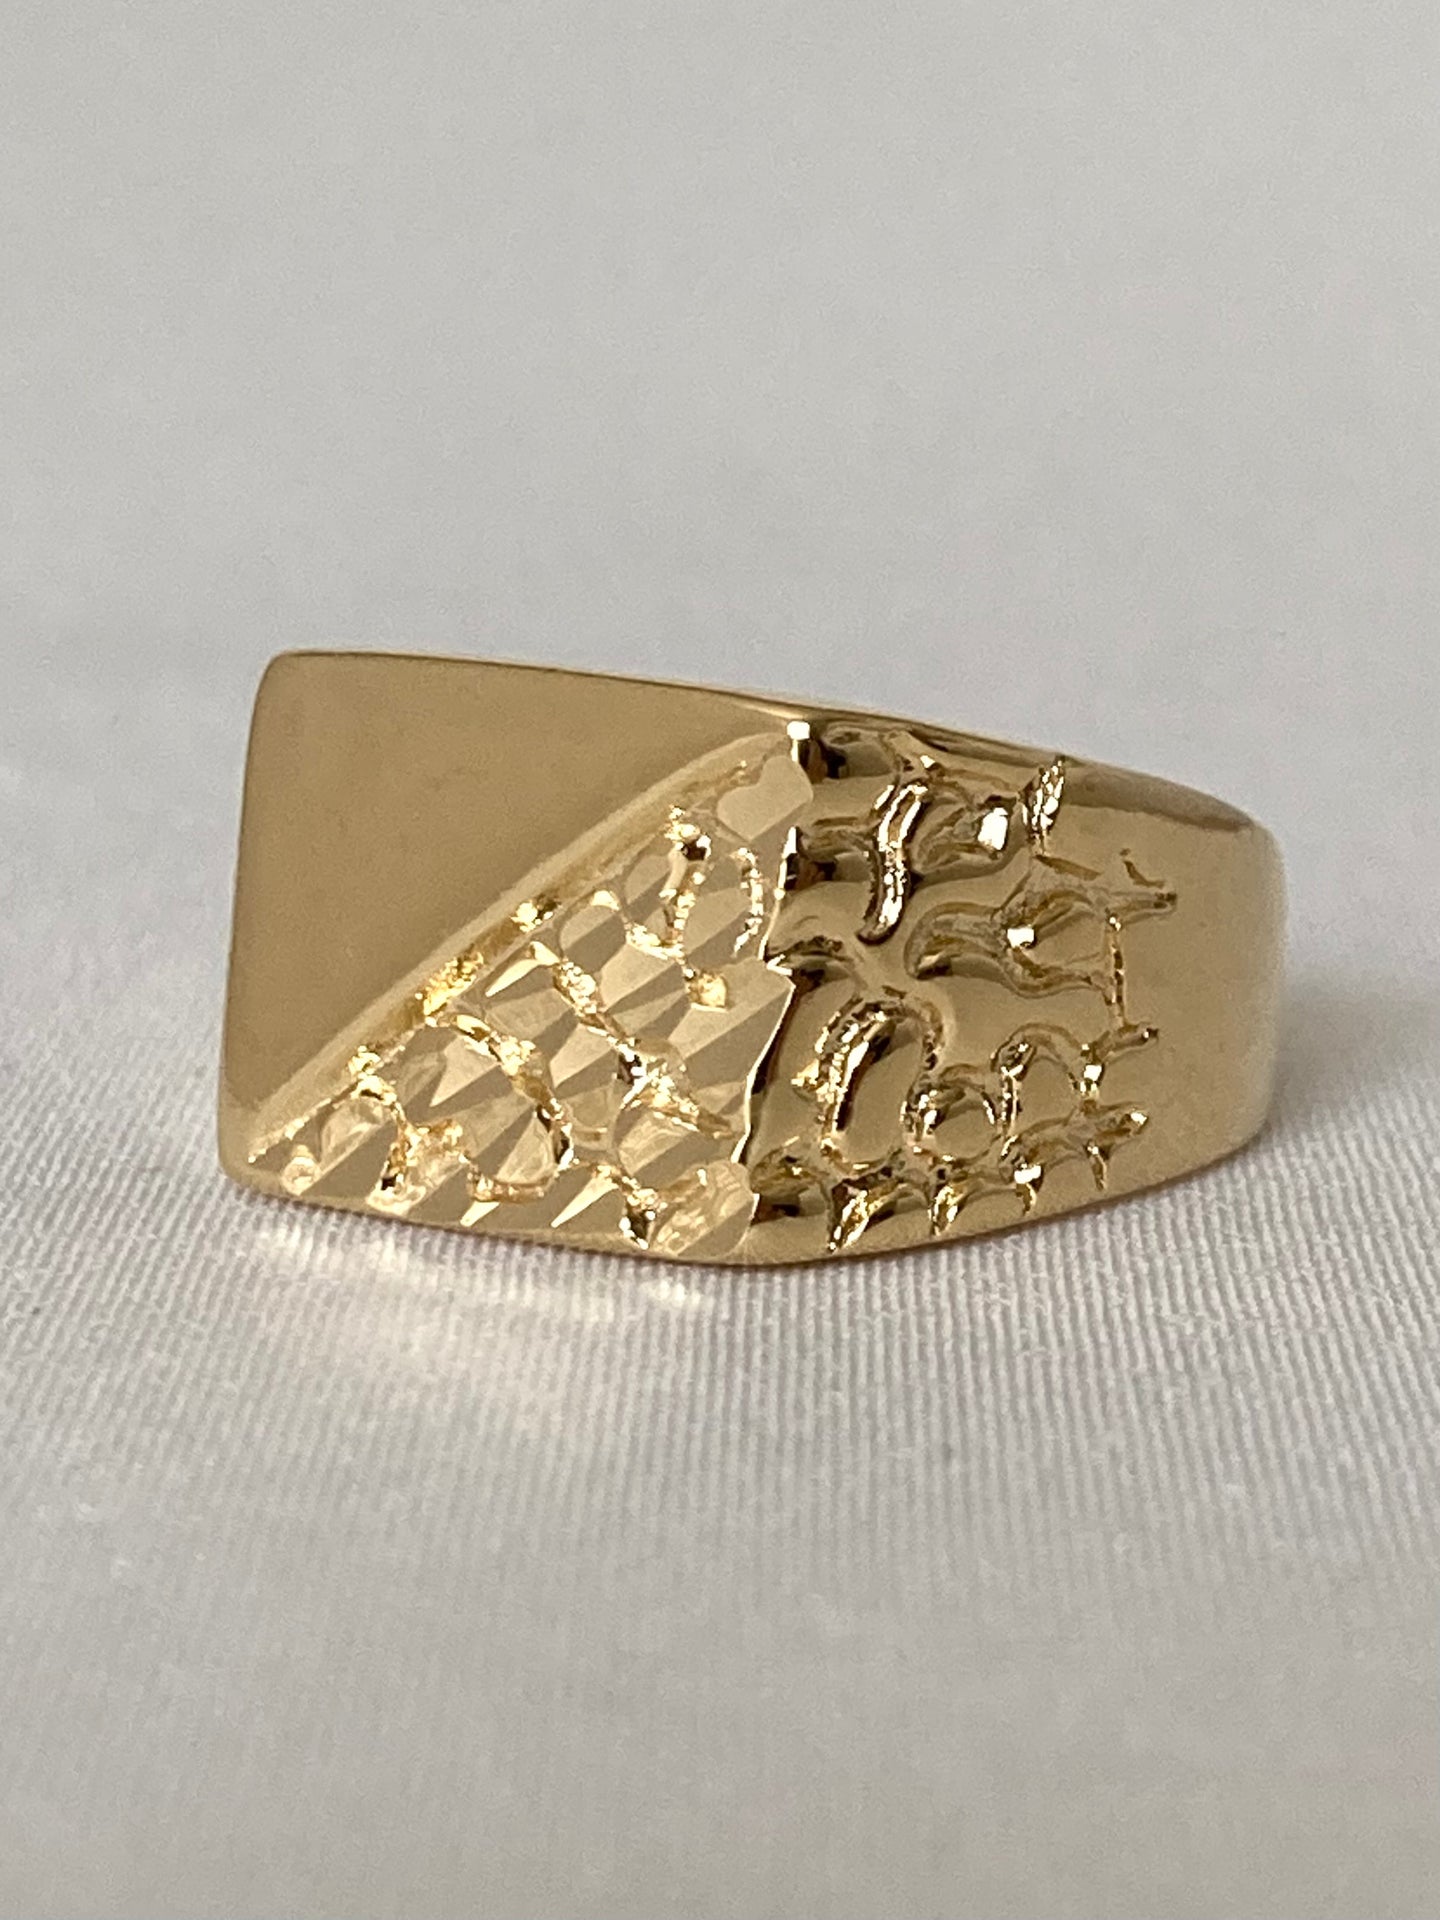 nugget ring, nugget ring women, nugget rings gold, mens rings fashion style, gold mens rings fashion, gold rings for men, men nugget rings, golden nugget rings, The catacomb ring child of wild, child of wild mens rings, child of wild jewelry